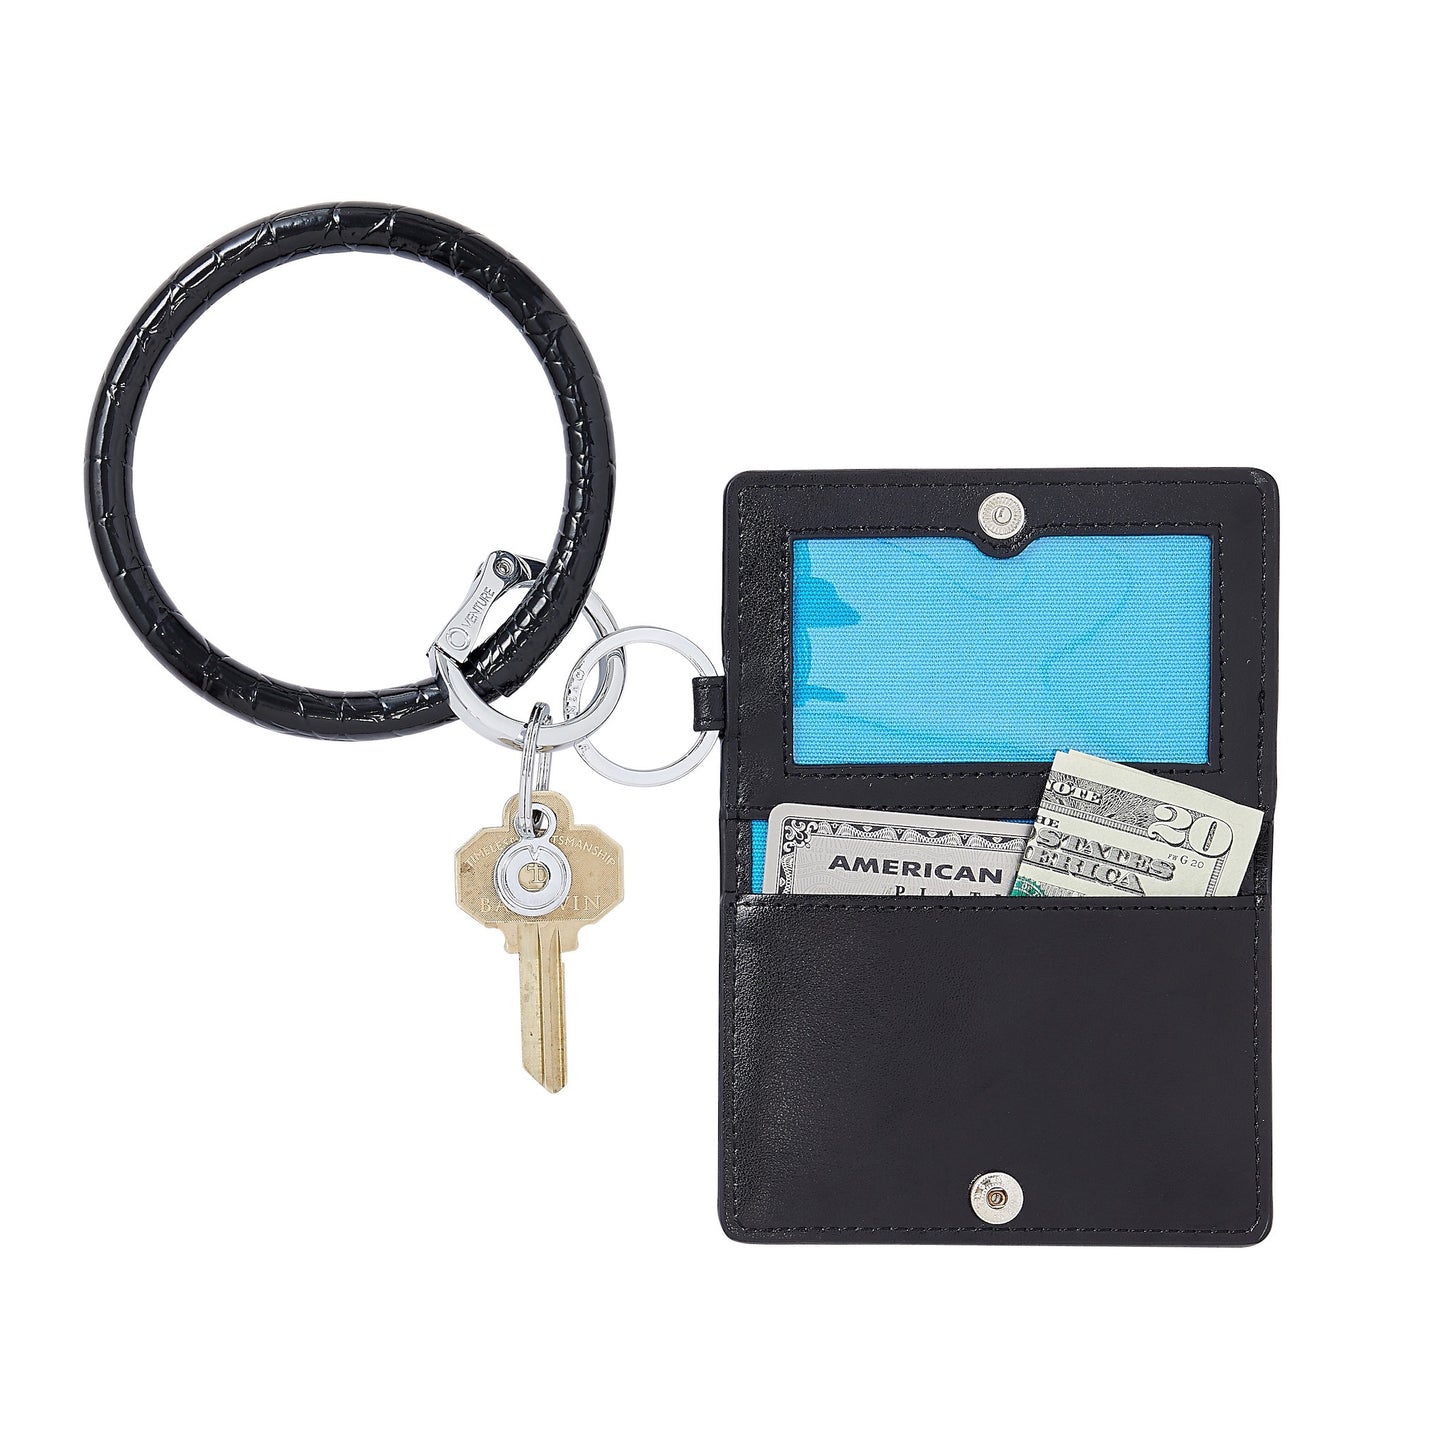 Back in Black - Leather ID Case - Oventure shown with clear window inside and peacock canvas liner